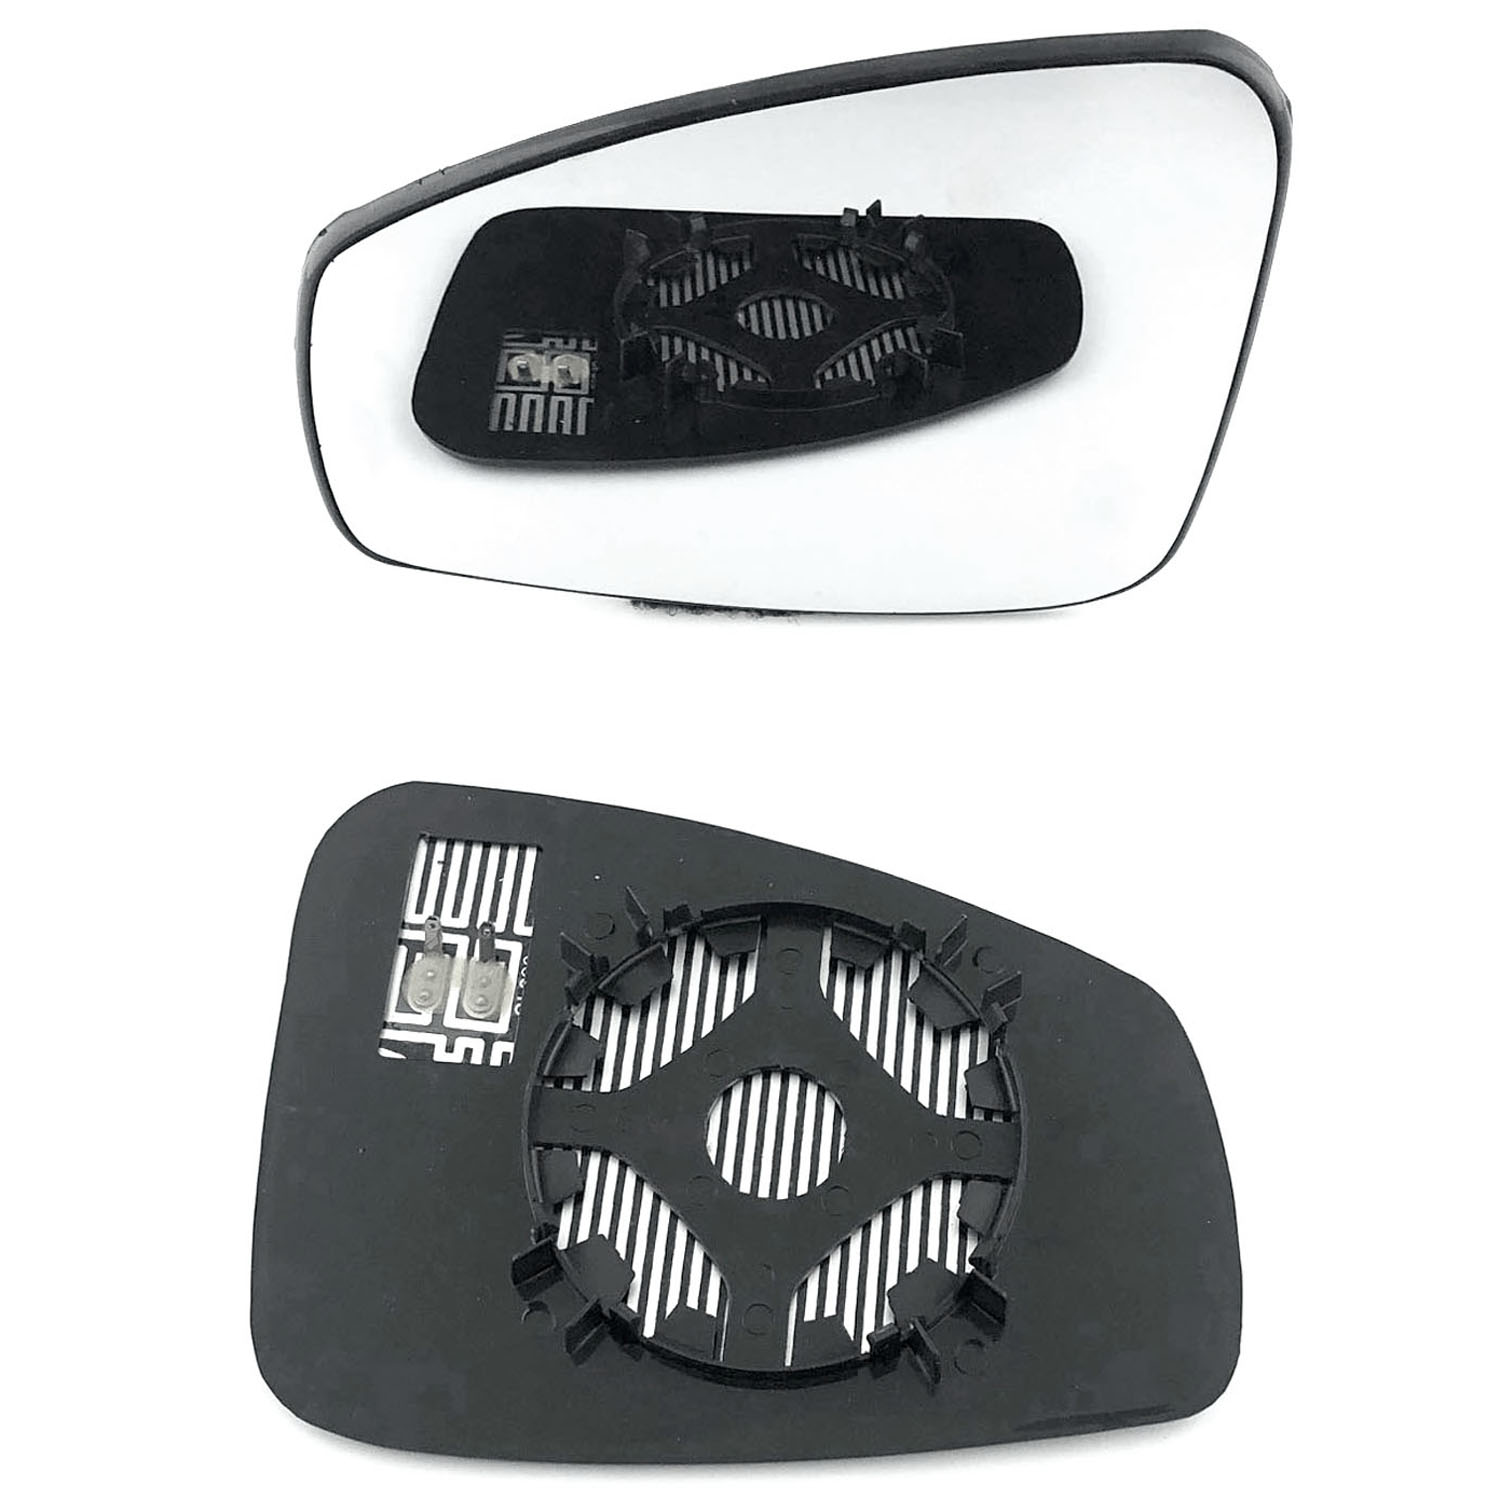 Renault Megane Wing Mirror Glass With Base LEFT HAND ( UK Passenger Side ) 2008 to 2015 – Heated Base Convex Mirror